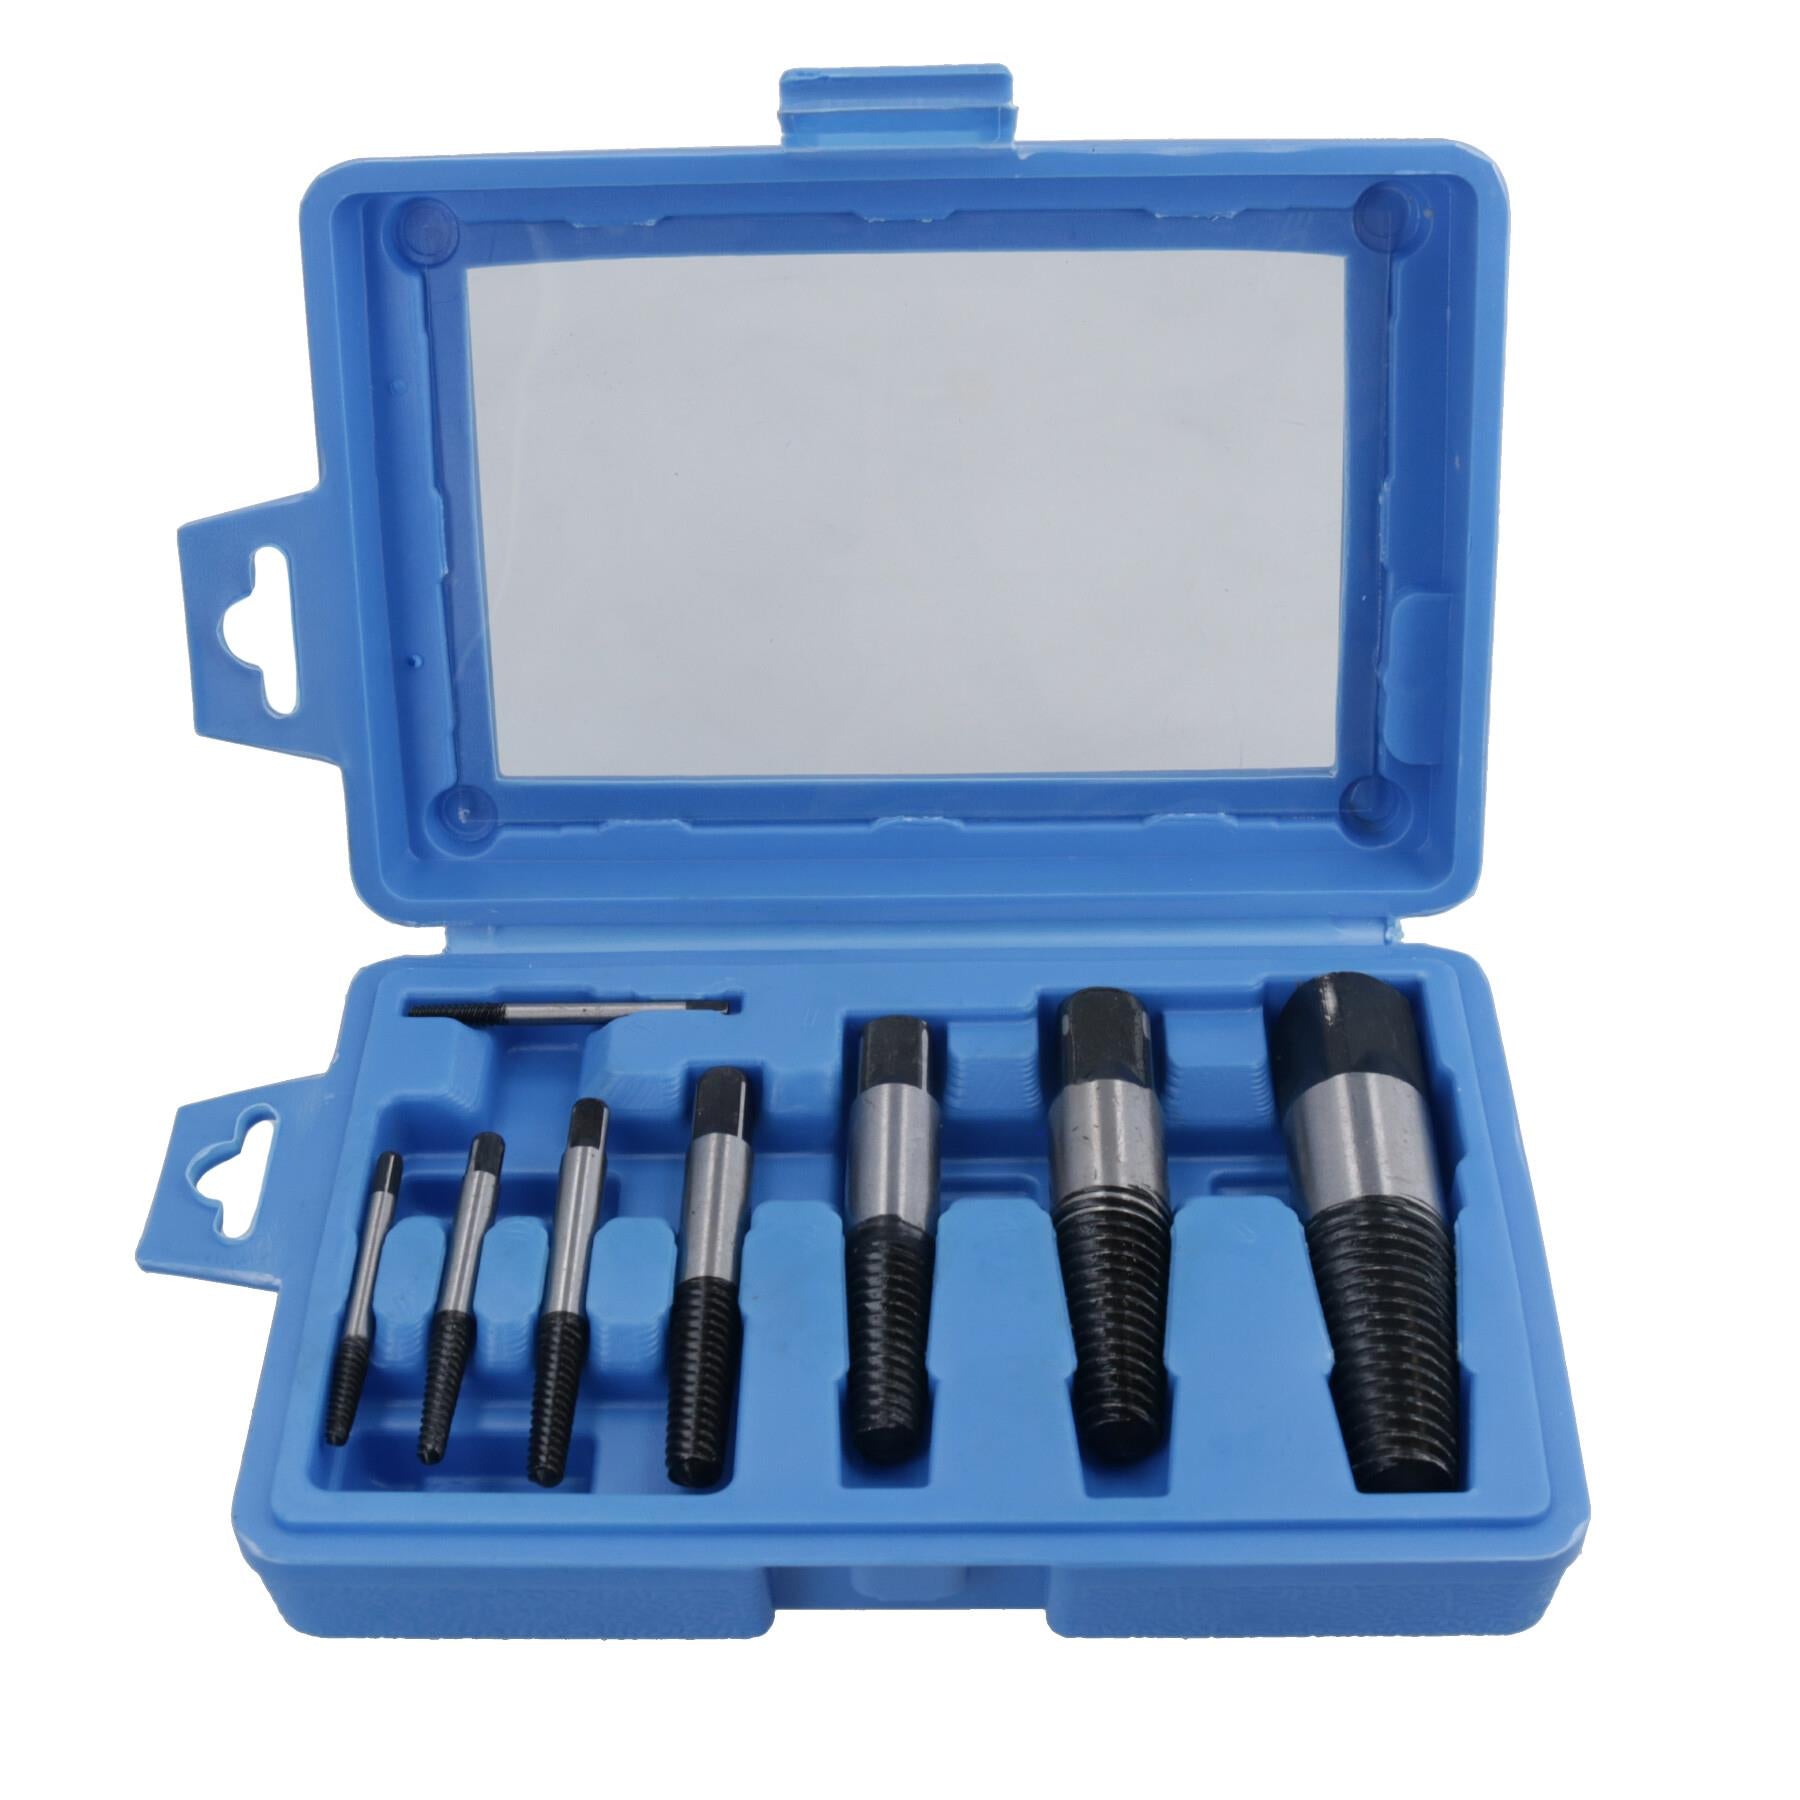 Stud / Bolt / Screw Extractor Remover Set for Rusted, Rounded, Seized Bolt TE111